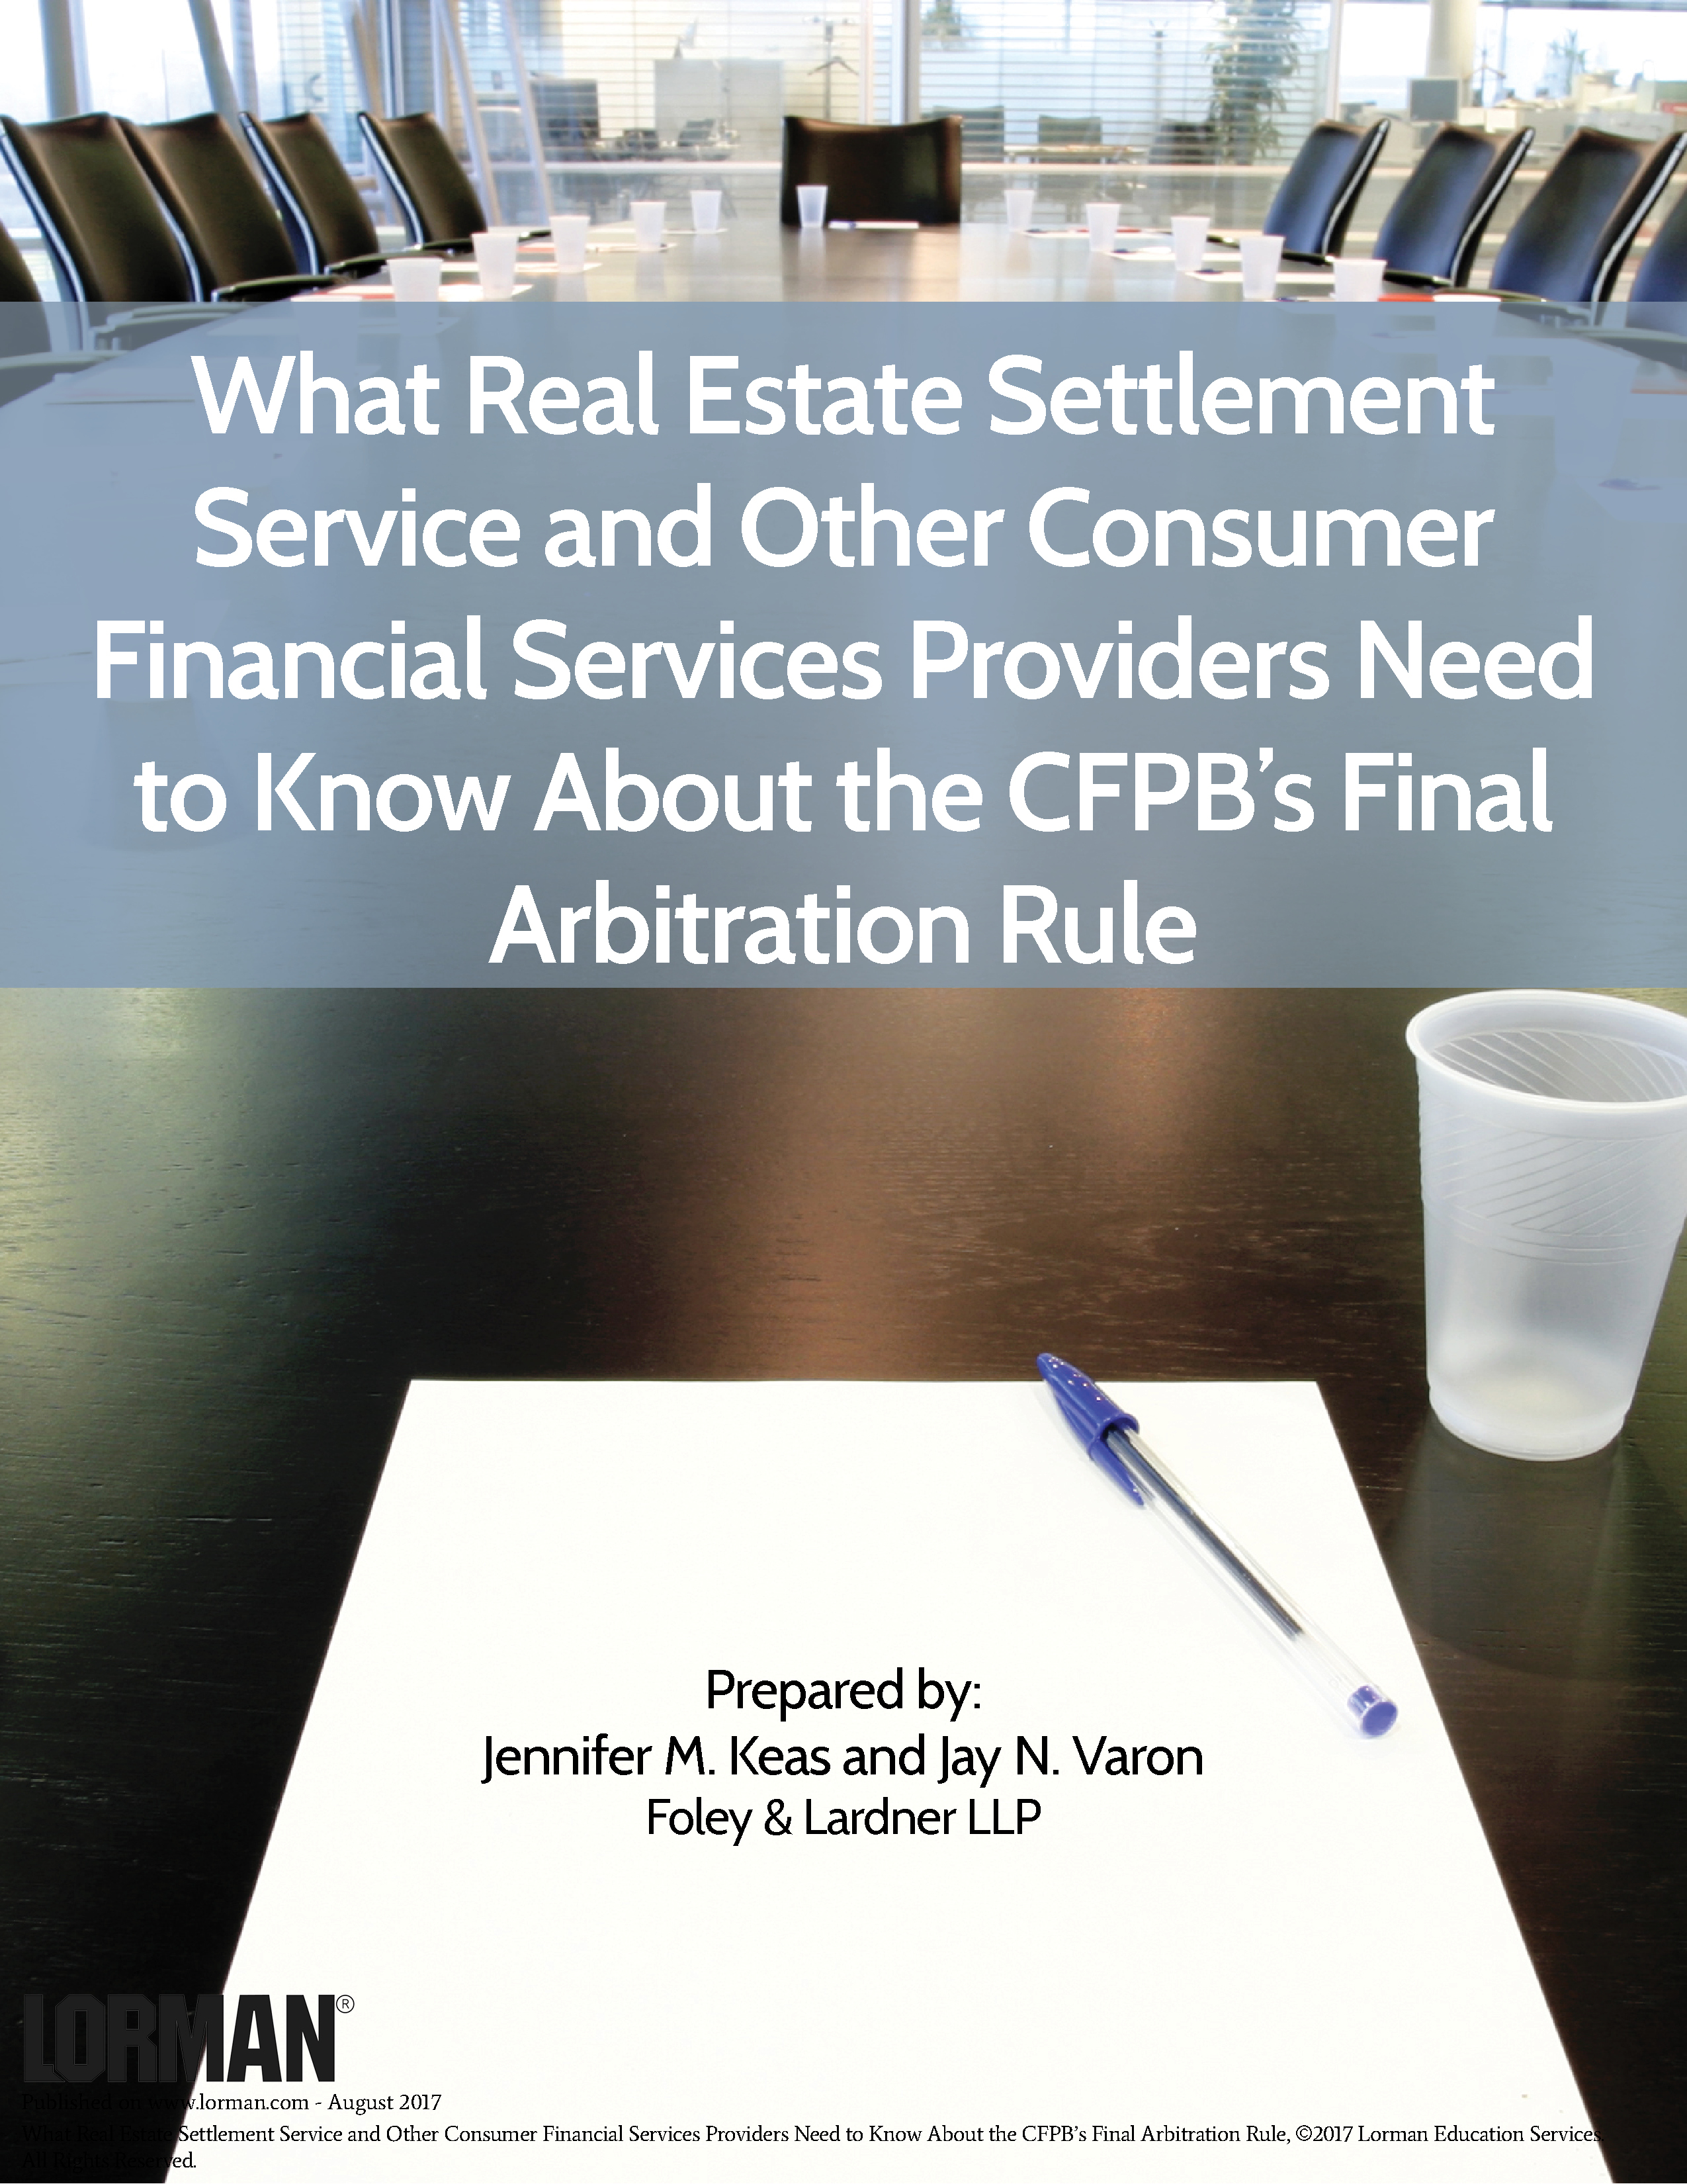 What Real Estate Settlement Service Providers Need to Know About the CFPB’s Final Arbitration Rule